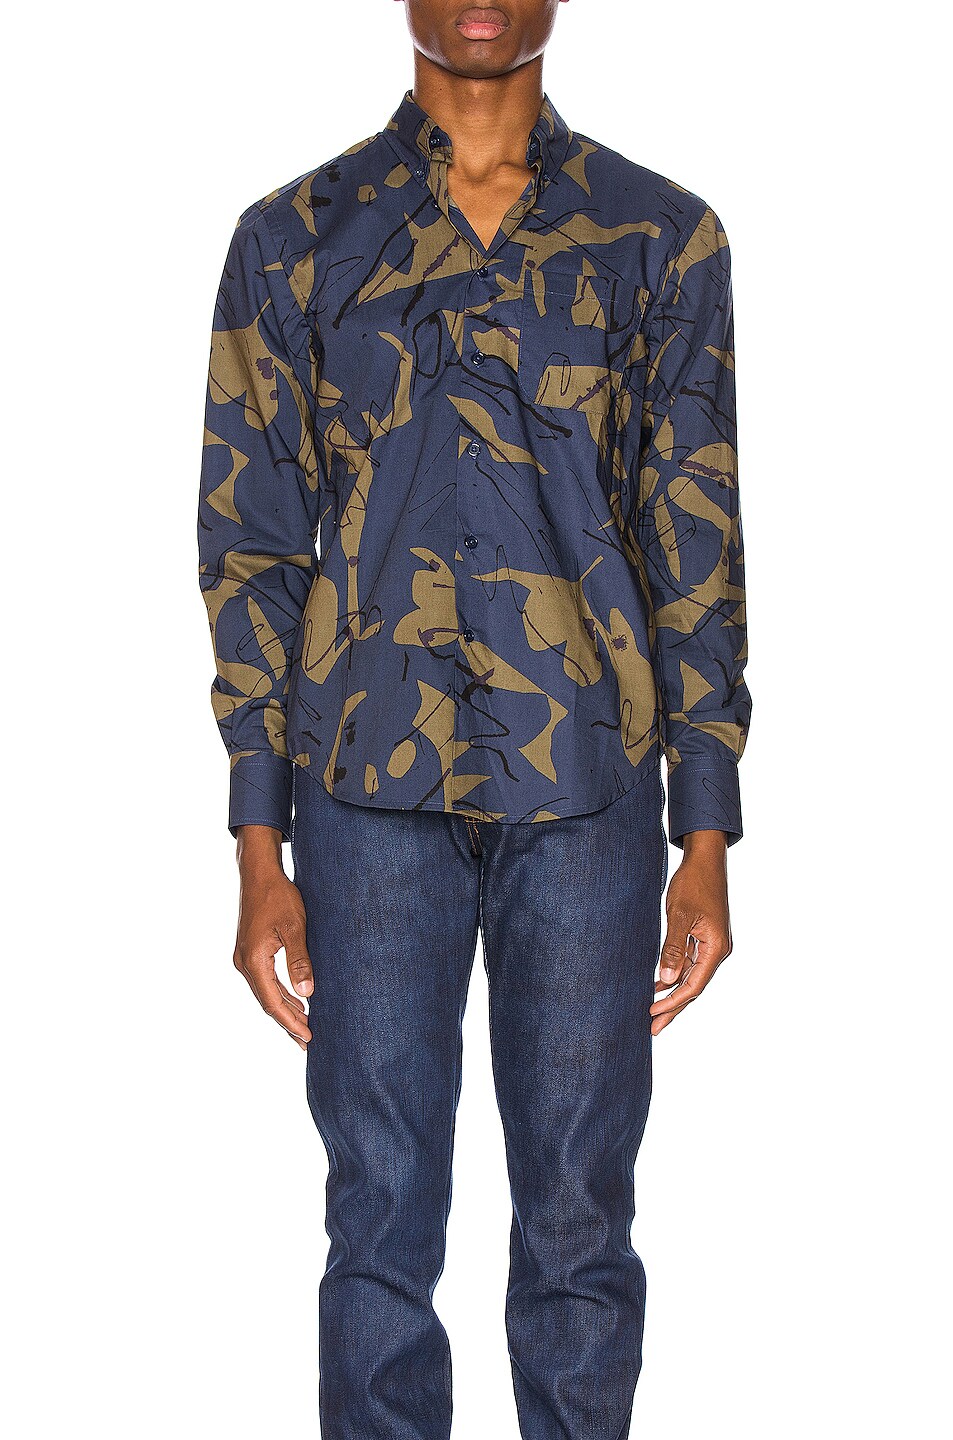 Image 1 of Naked & Famous Denim Easy Shirt in Navy Abstract Mod Print